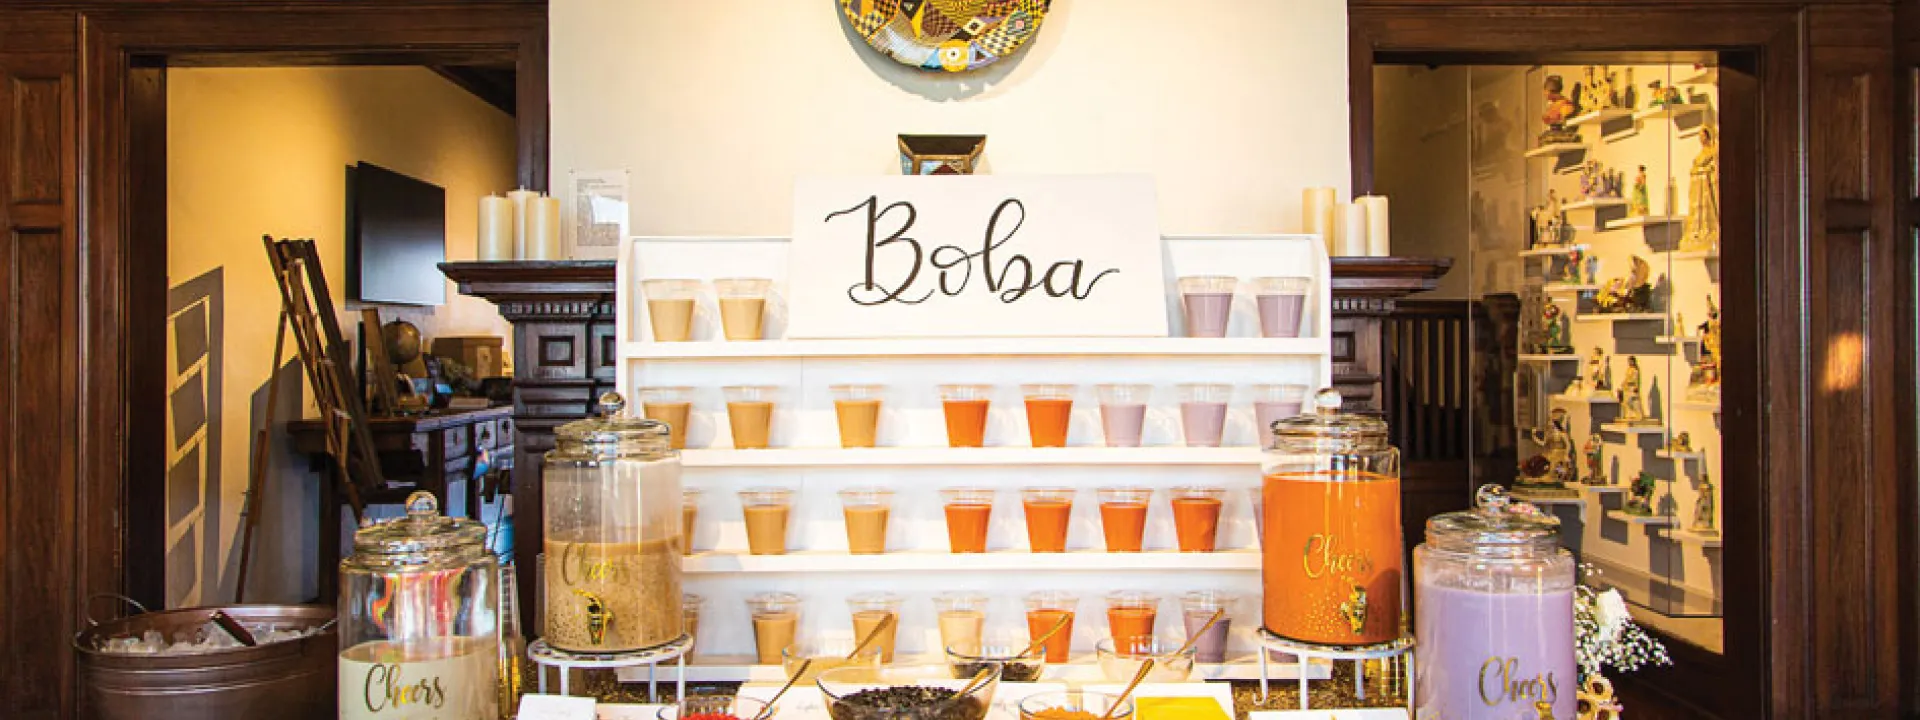 Boba bar is a fun, new addition to wedding receptions. 